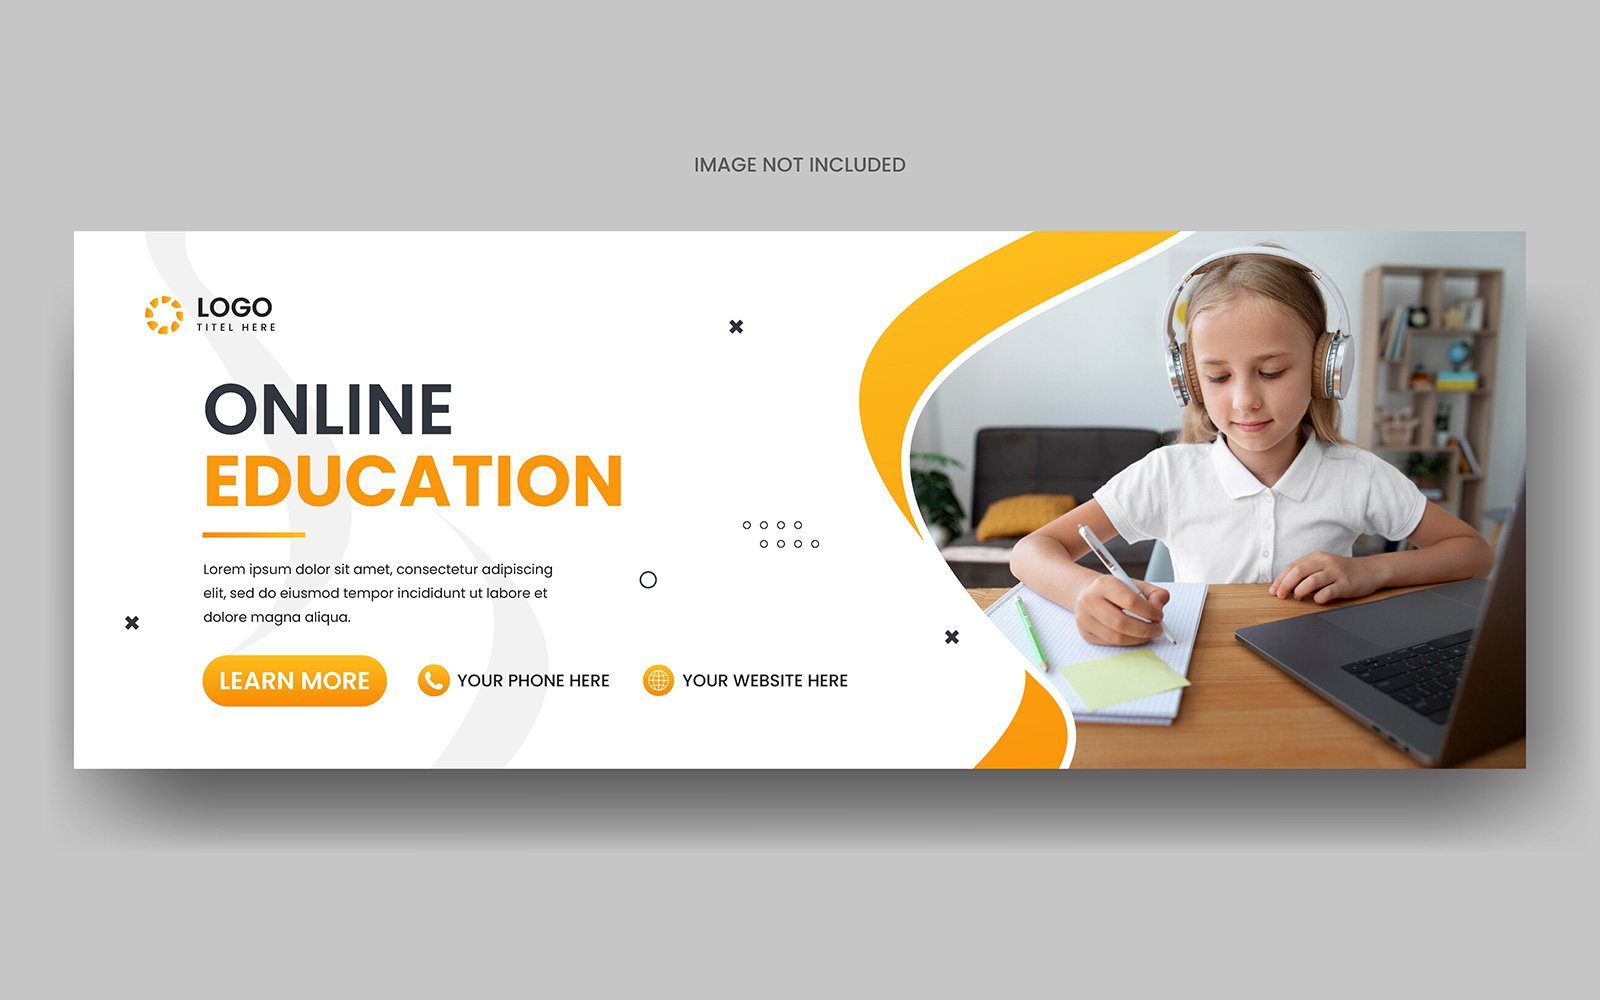 Template #301014 Online Education Webdesign Template - Logo template Preview